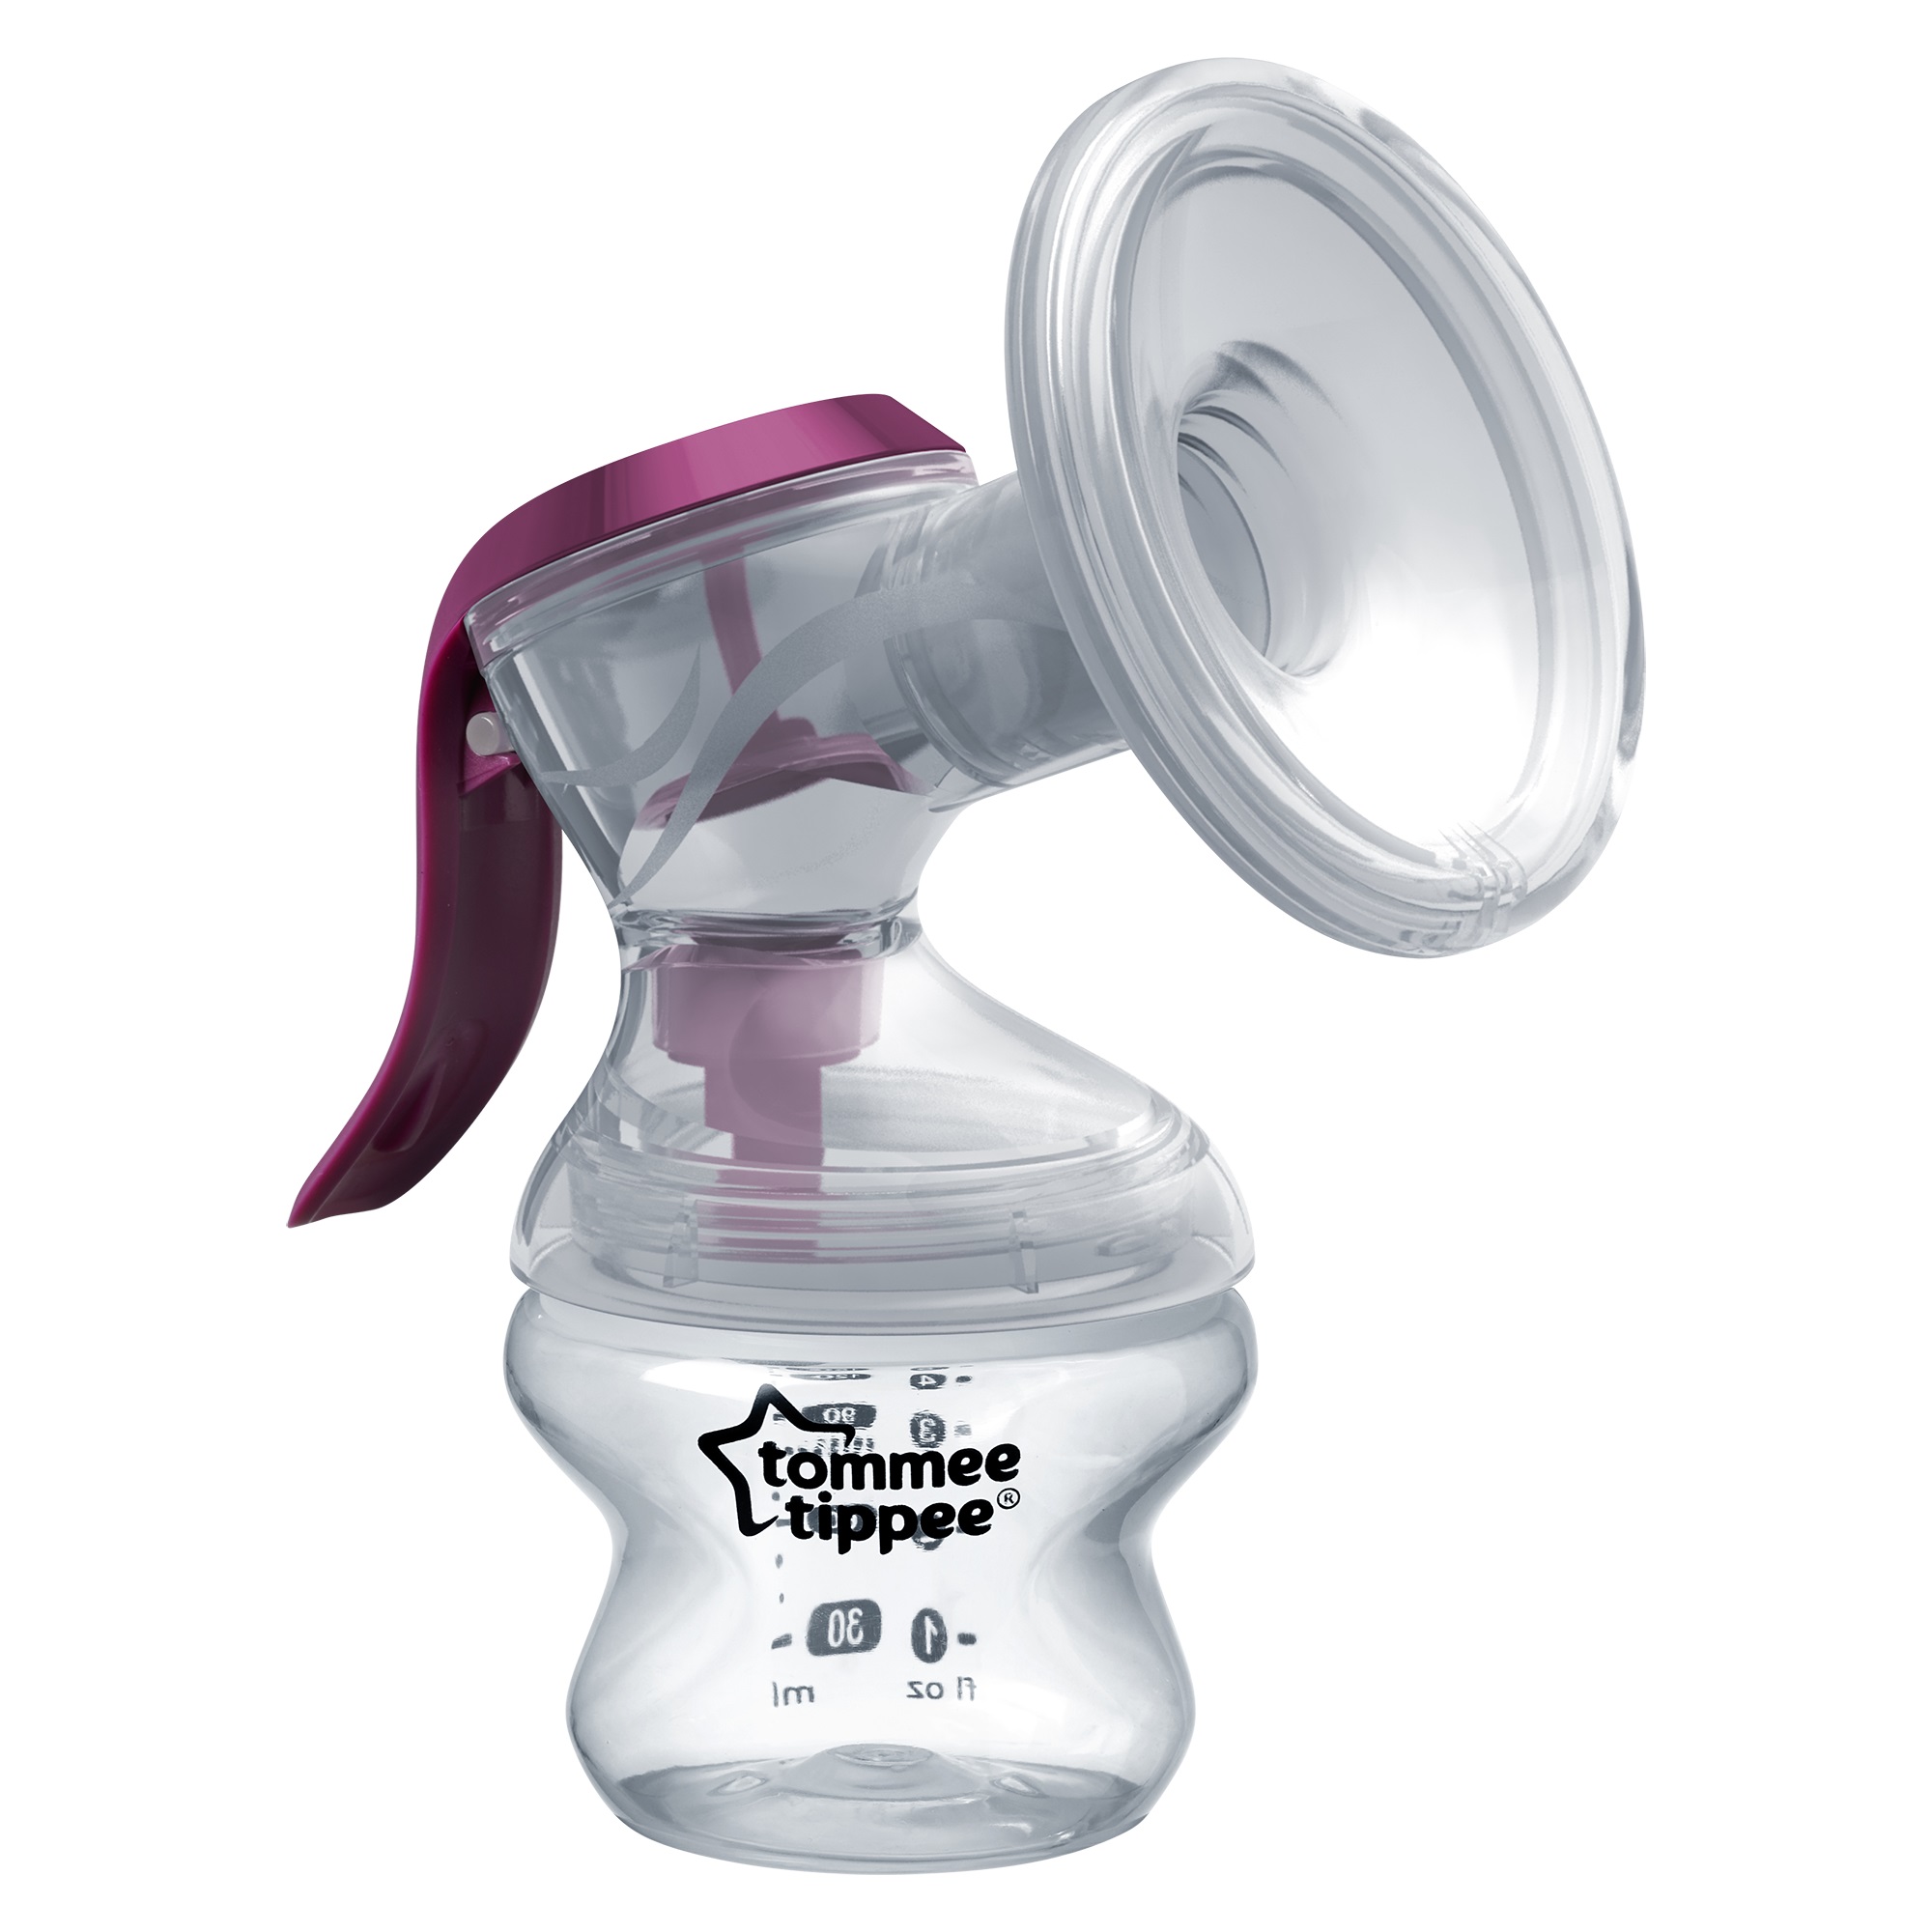 Tommee Tippee Made for Me Single Manual Breast Pump | Soft, Cushioned Silicone Cup | Reduced Hand Strain - image 1 of 8